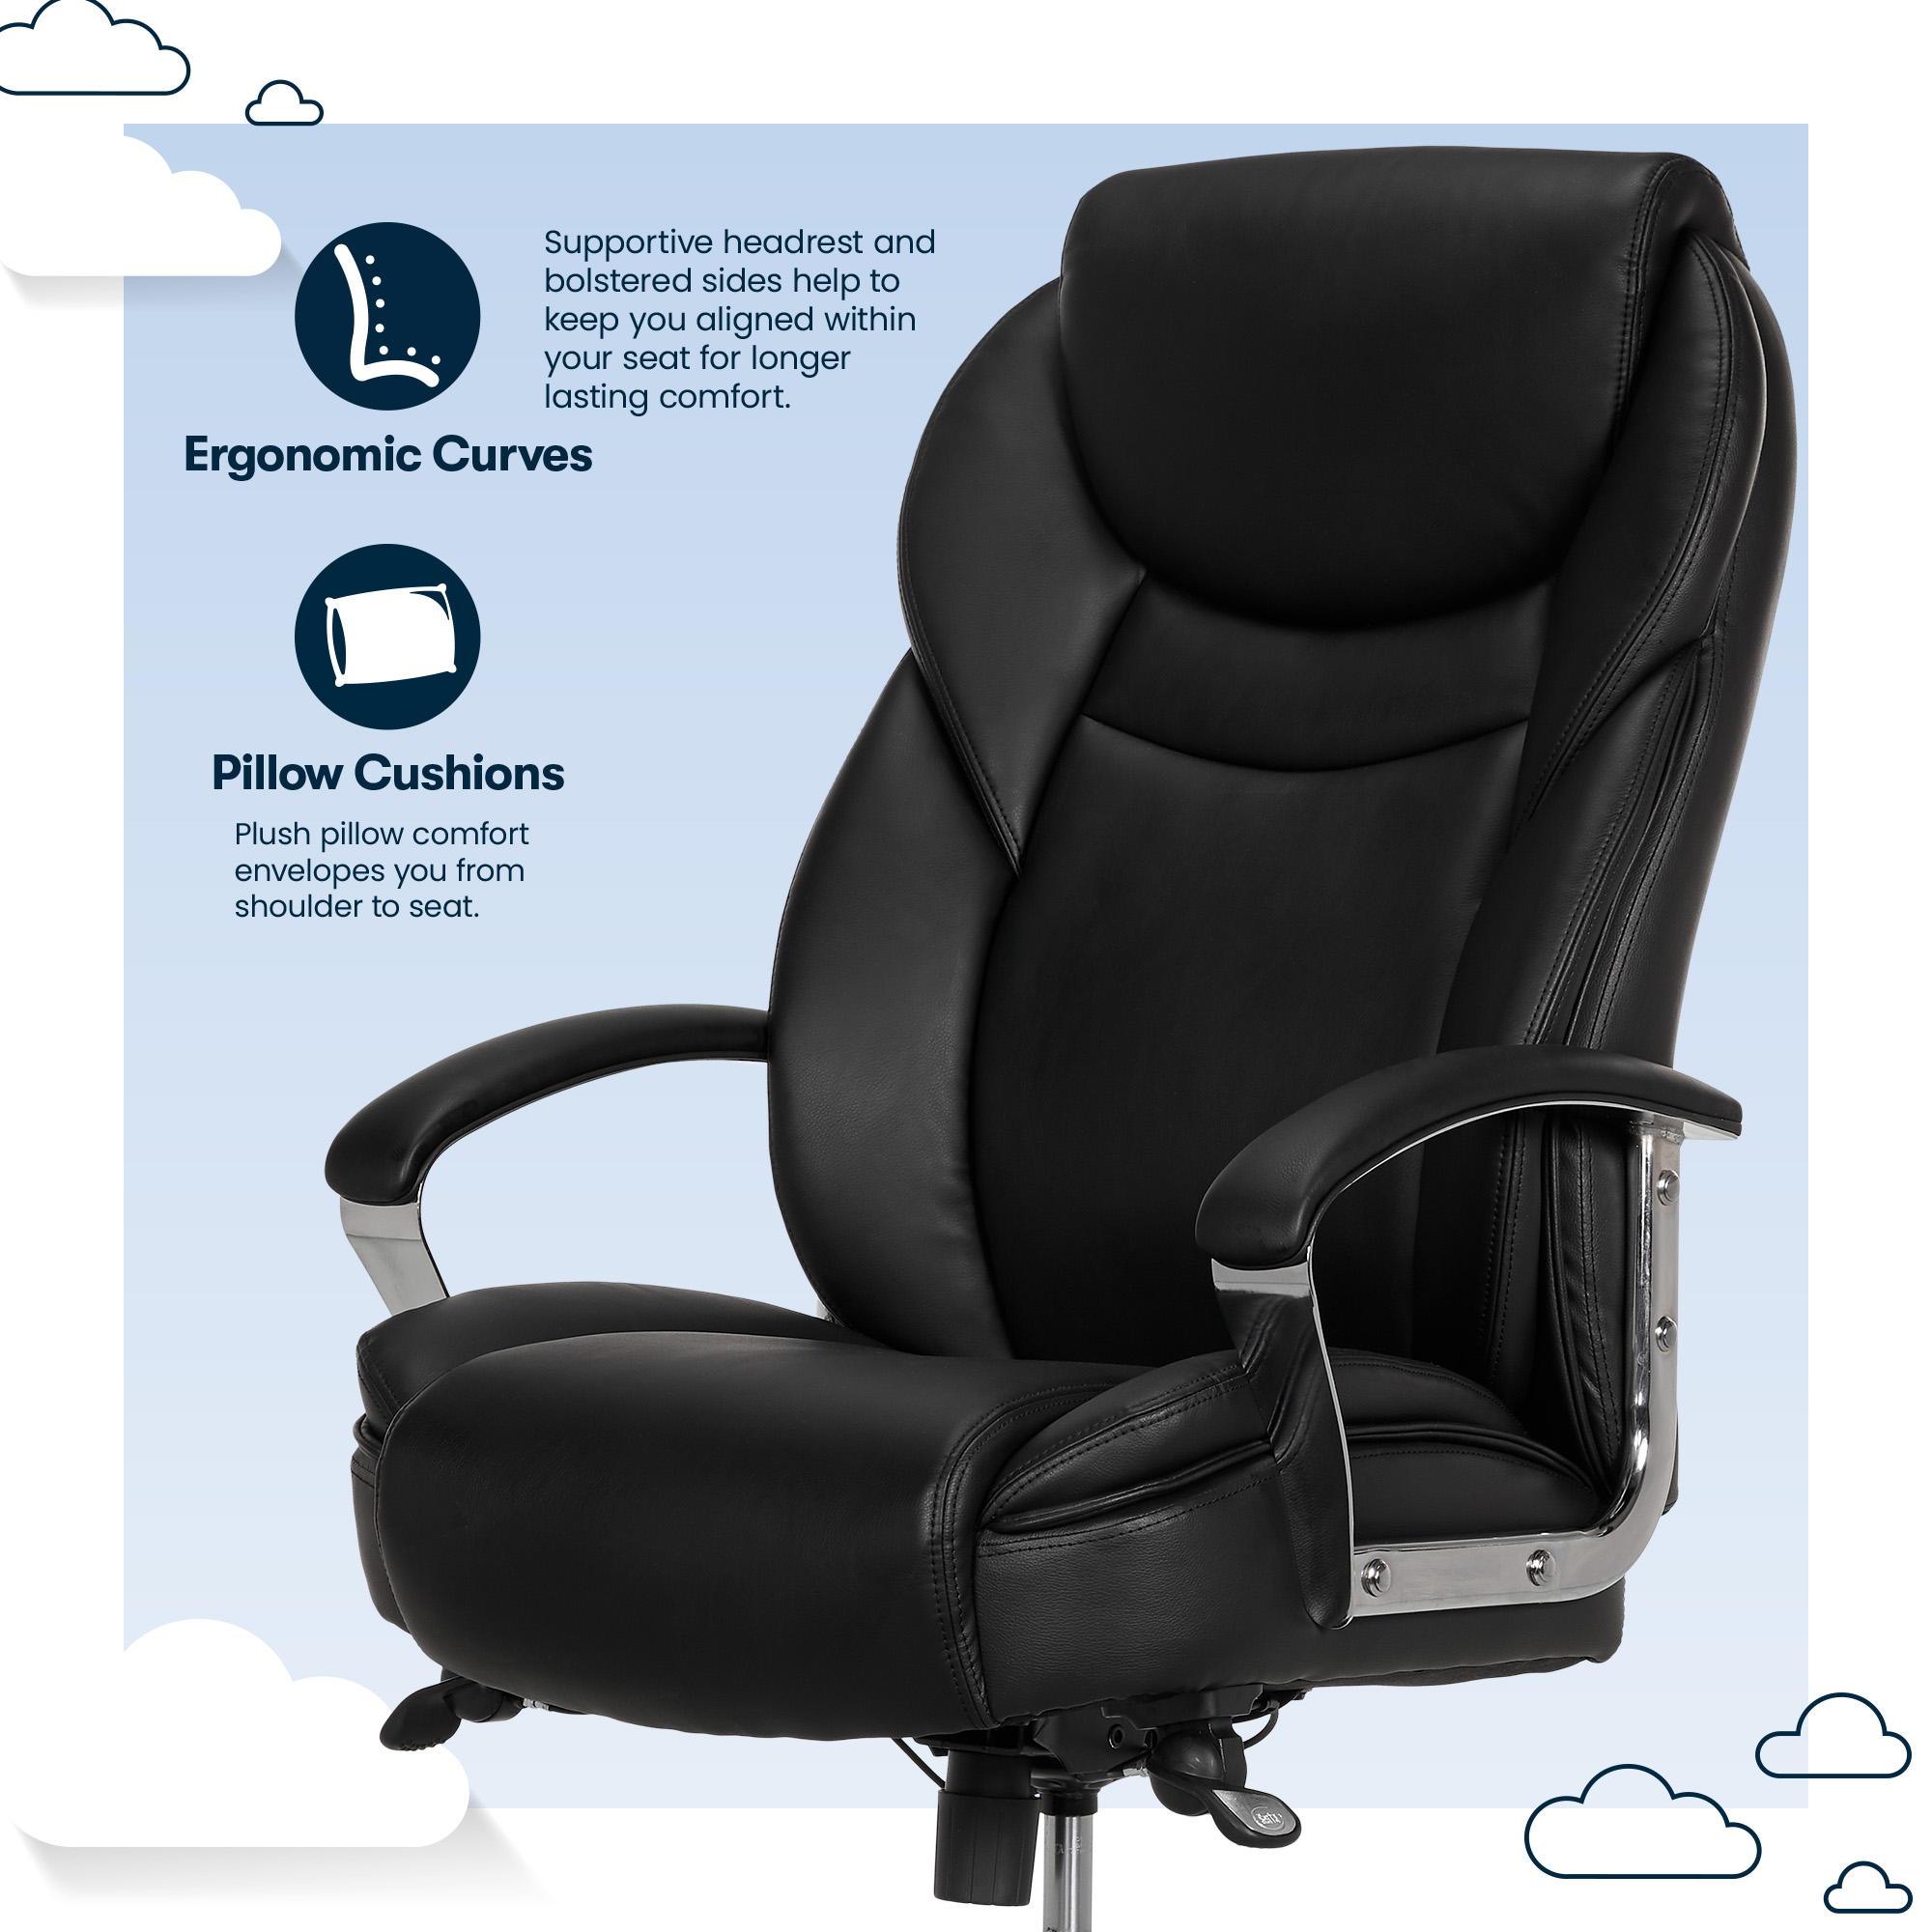 Serta Big & Tall High Back Office Chair, Heavy Duty Weight Rating, Black Bonded Leather Upholstery - image 4 of 12